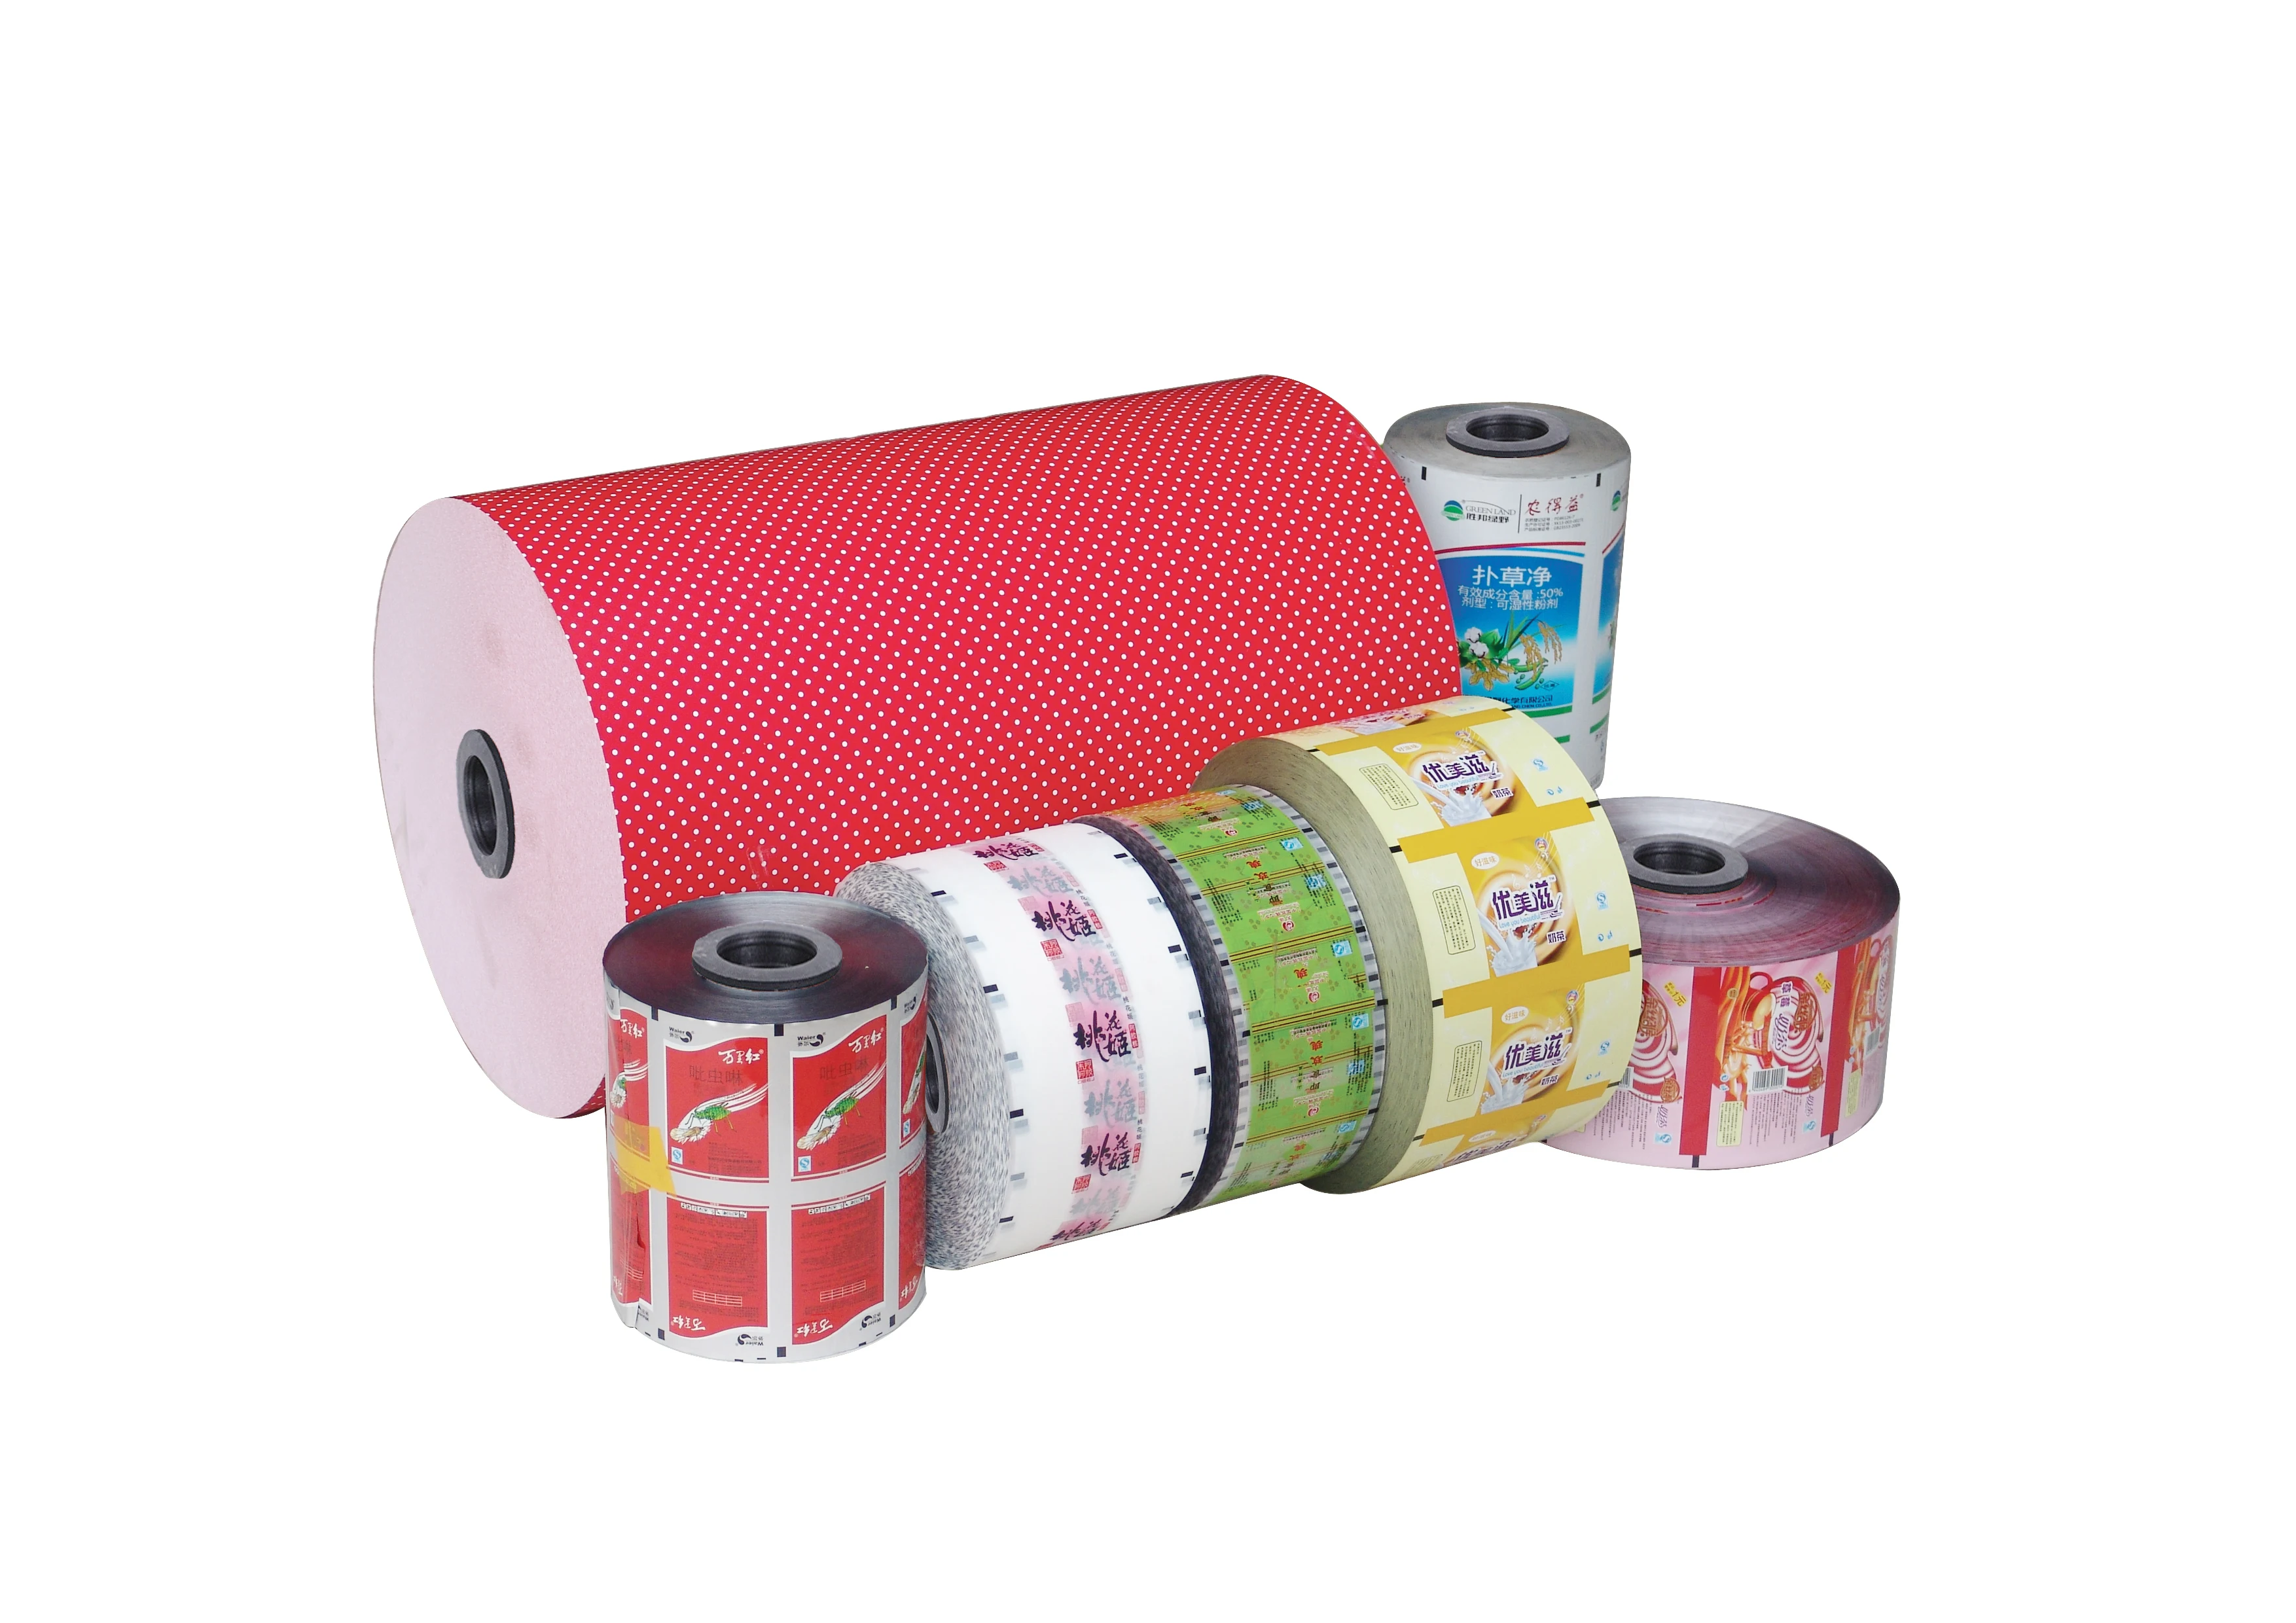 Competitive Price Colorful Customized Plastic Foil Packaging Film In Roll